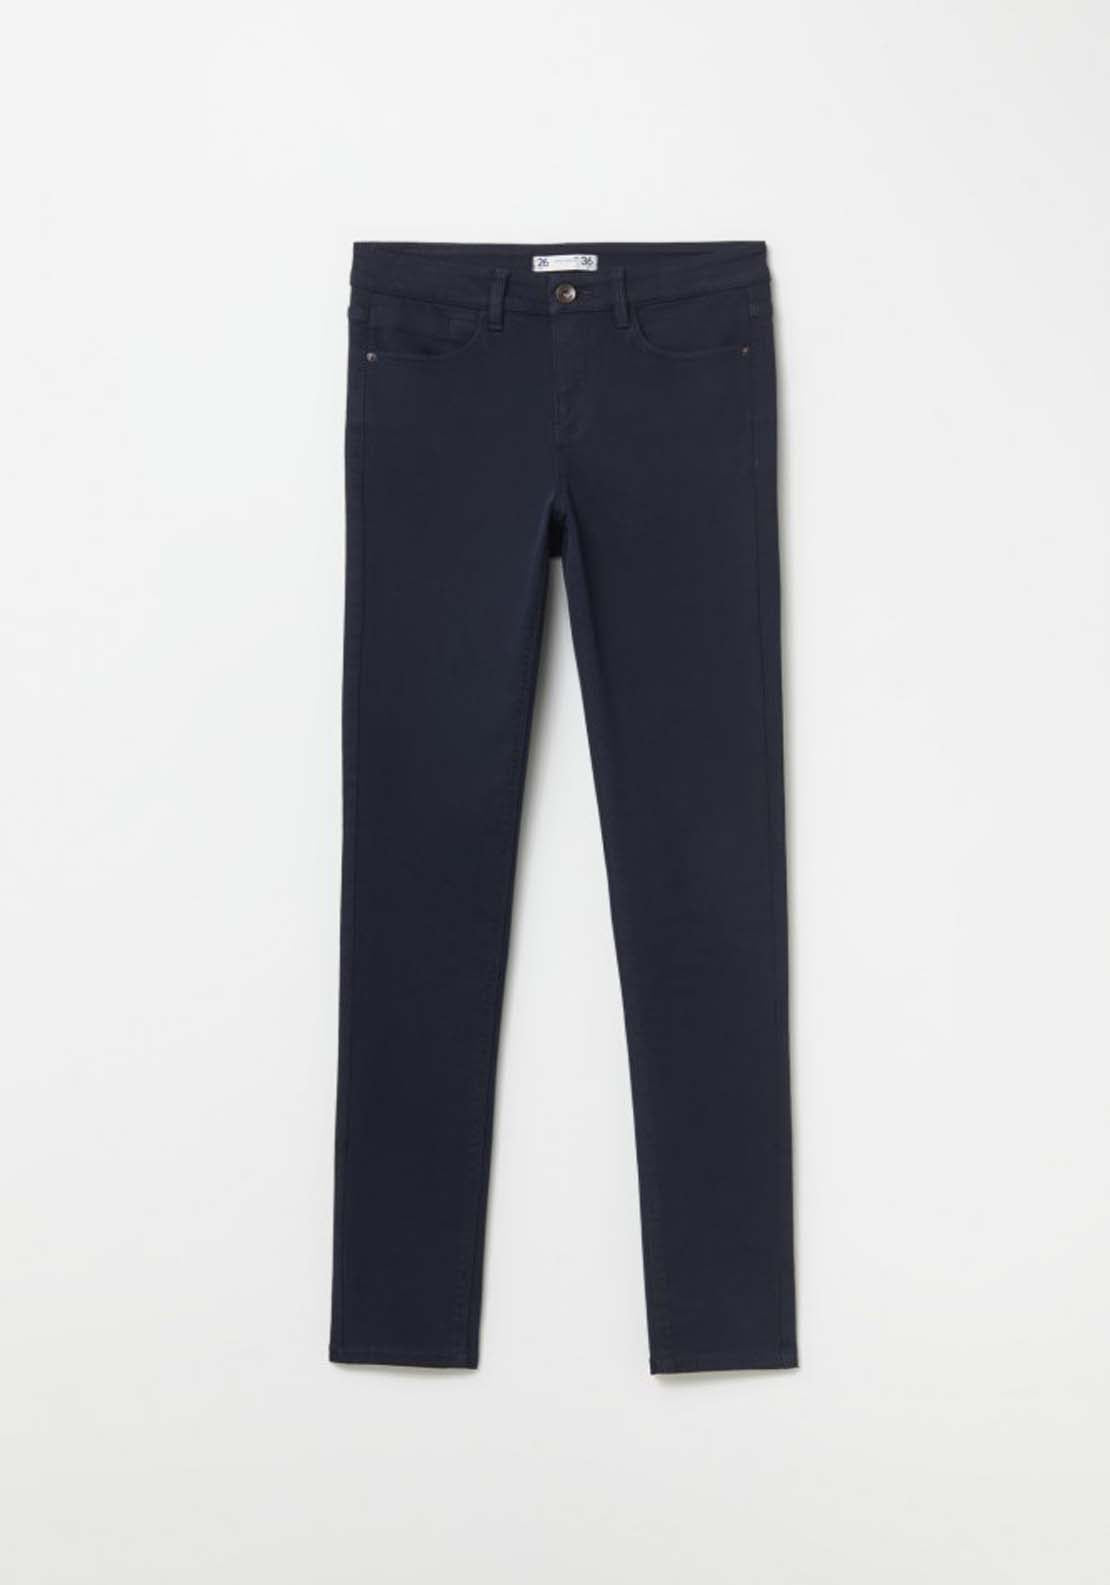 Sfera Coloured skinny jeans 6 Shaws Department Stores